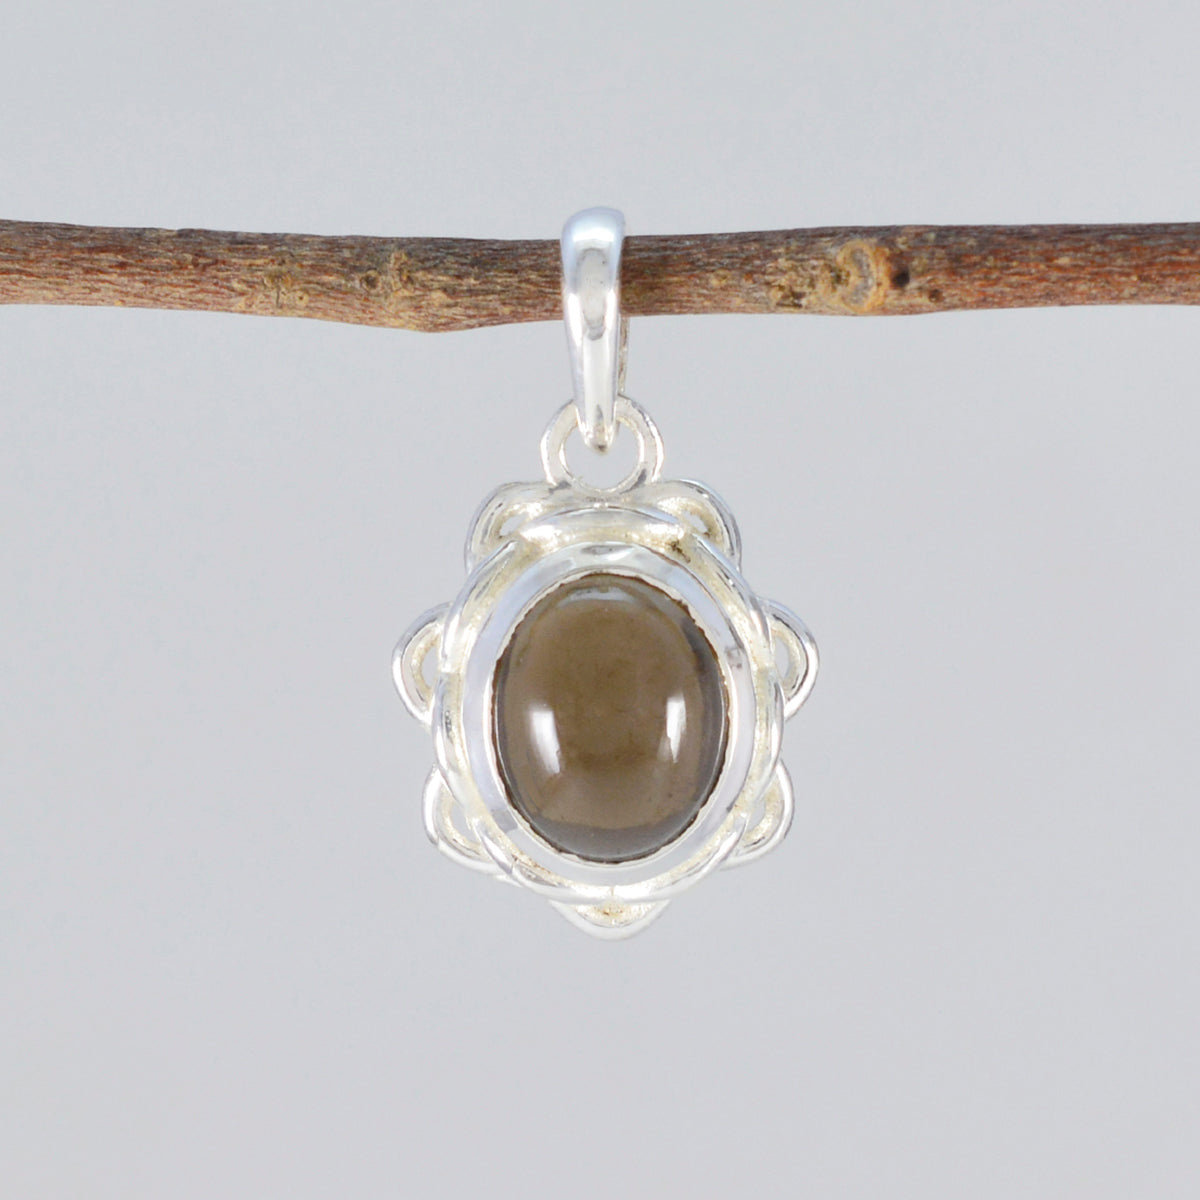 Riyo Knockout Gems Oval Cabochon Brown Smoky Quartz Solid Silver Pendant Gift For Good Friday